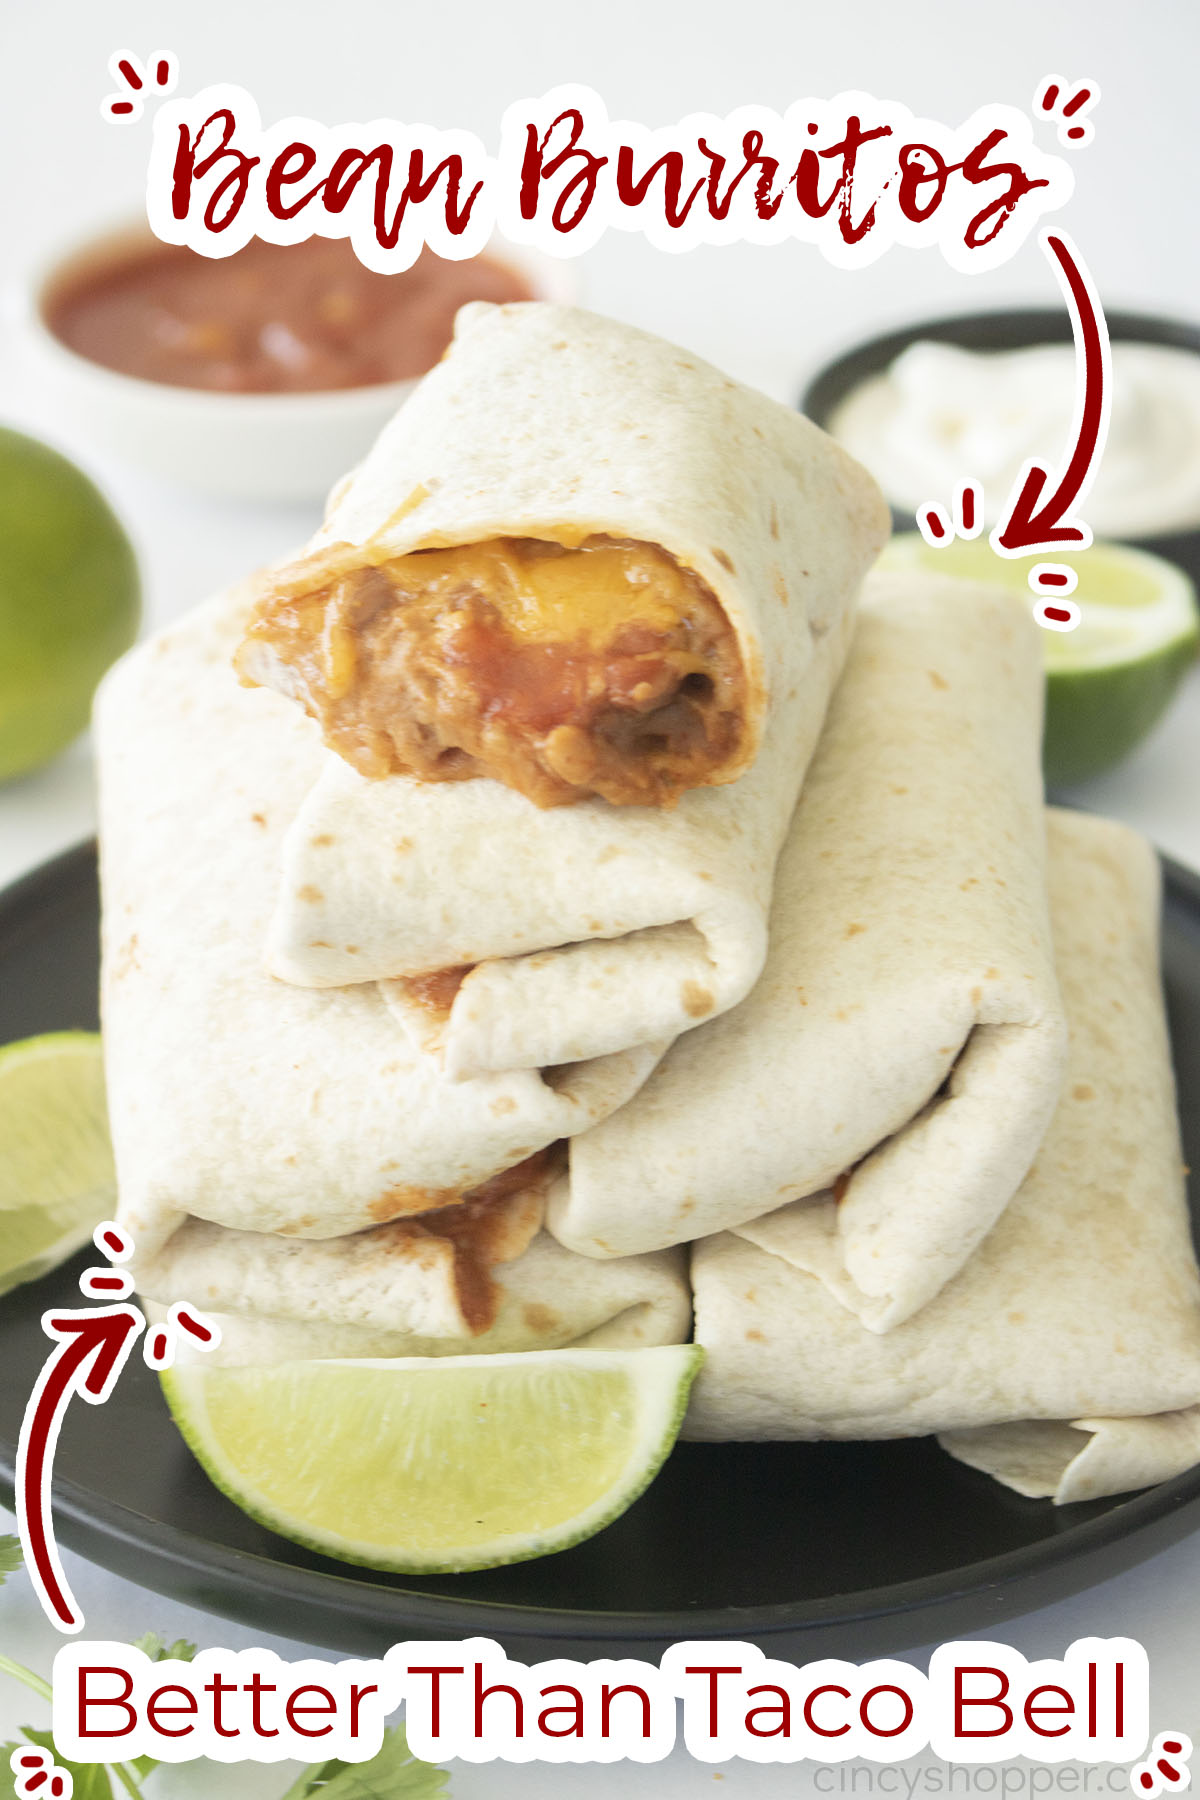 Text on image Bean Burritos Better than Taco Bell.